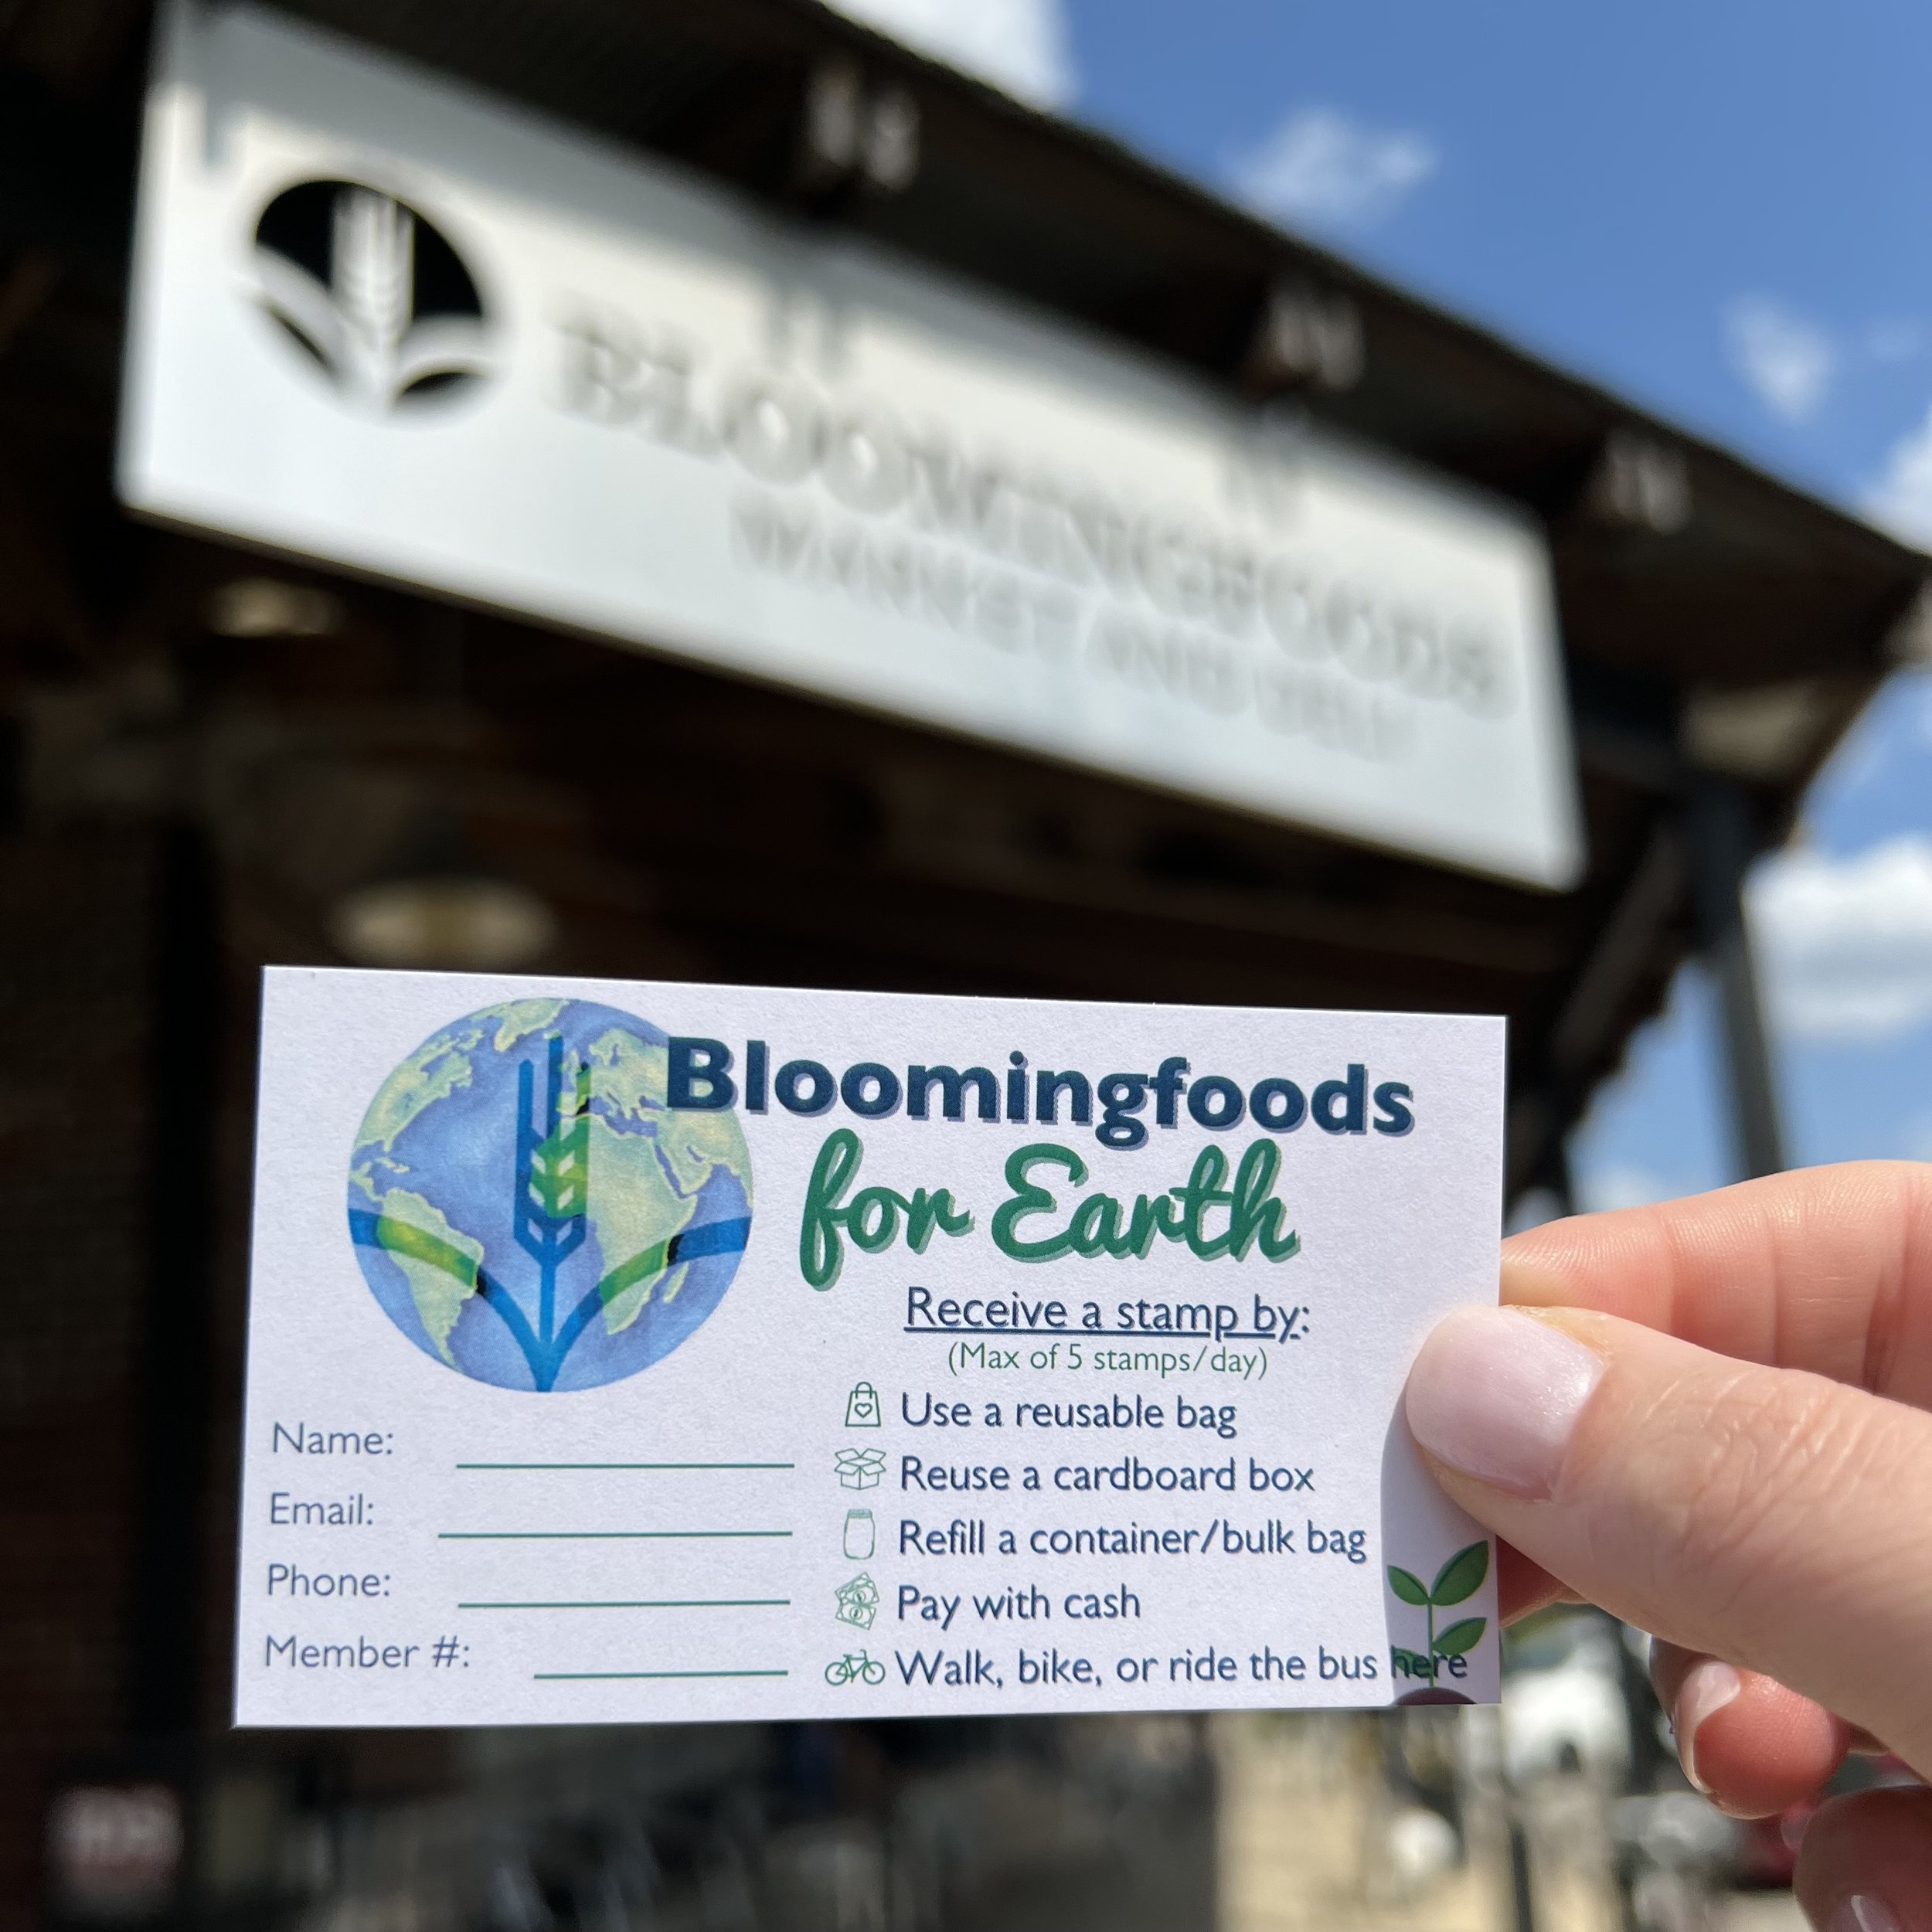 Bloomingfoods for Earth rewards card